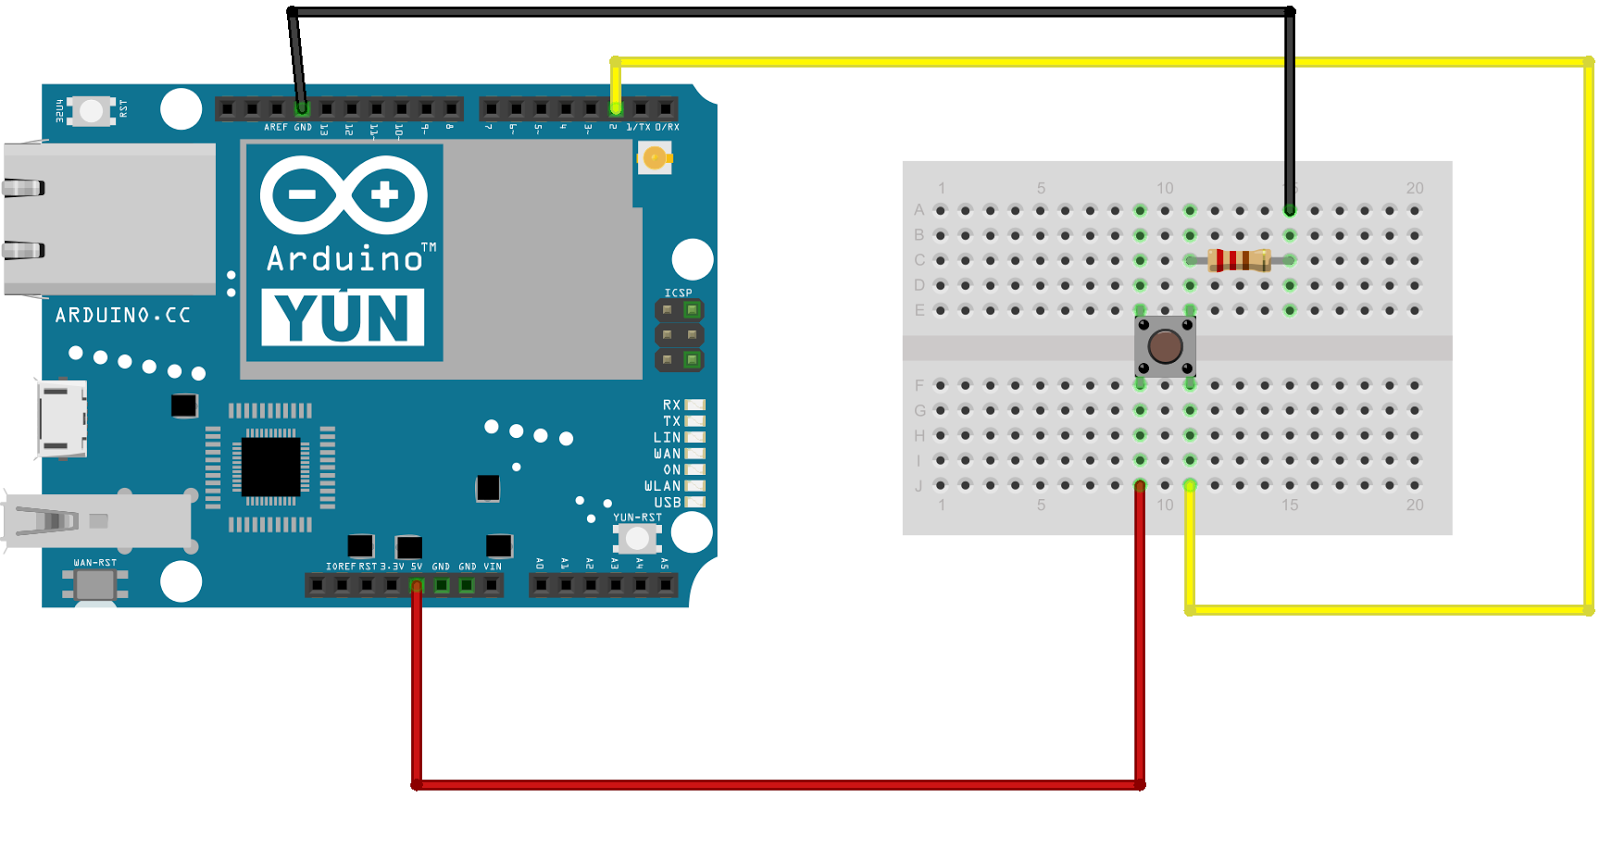 binarypower: Use Arduino Yun to send emails (simple instructions for